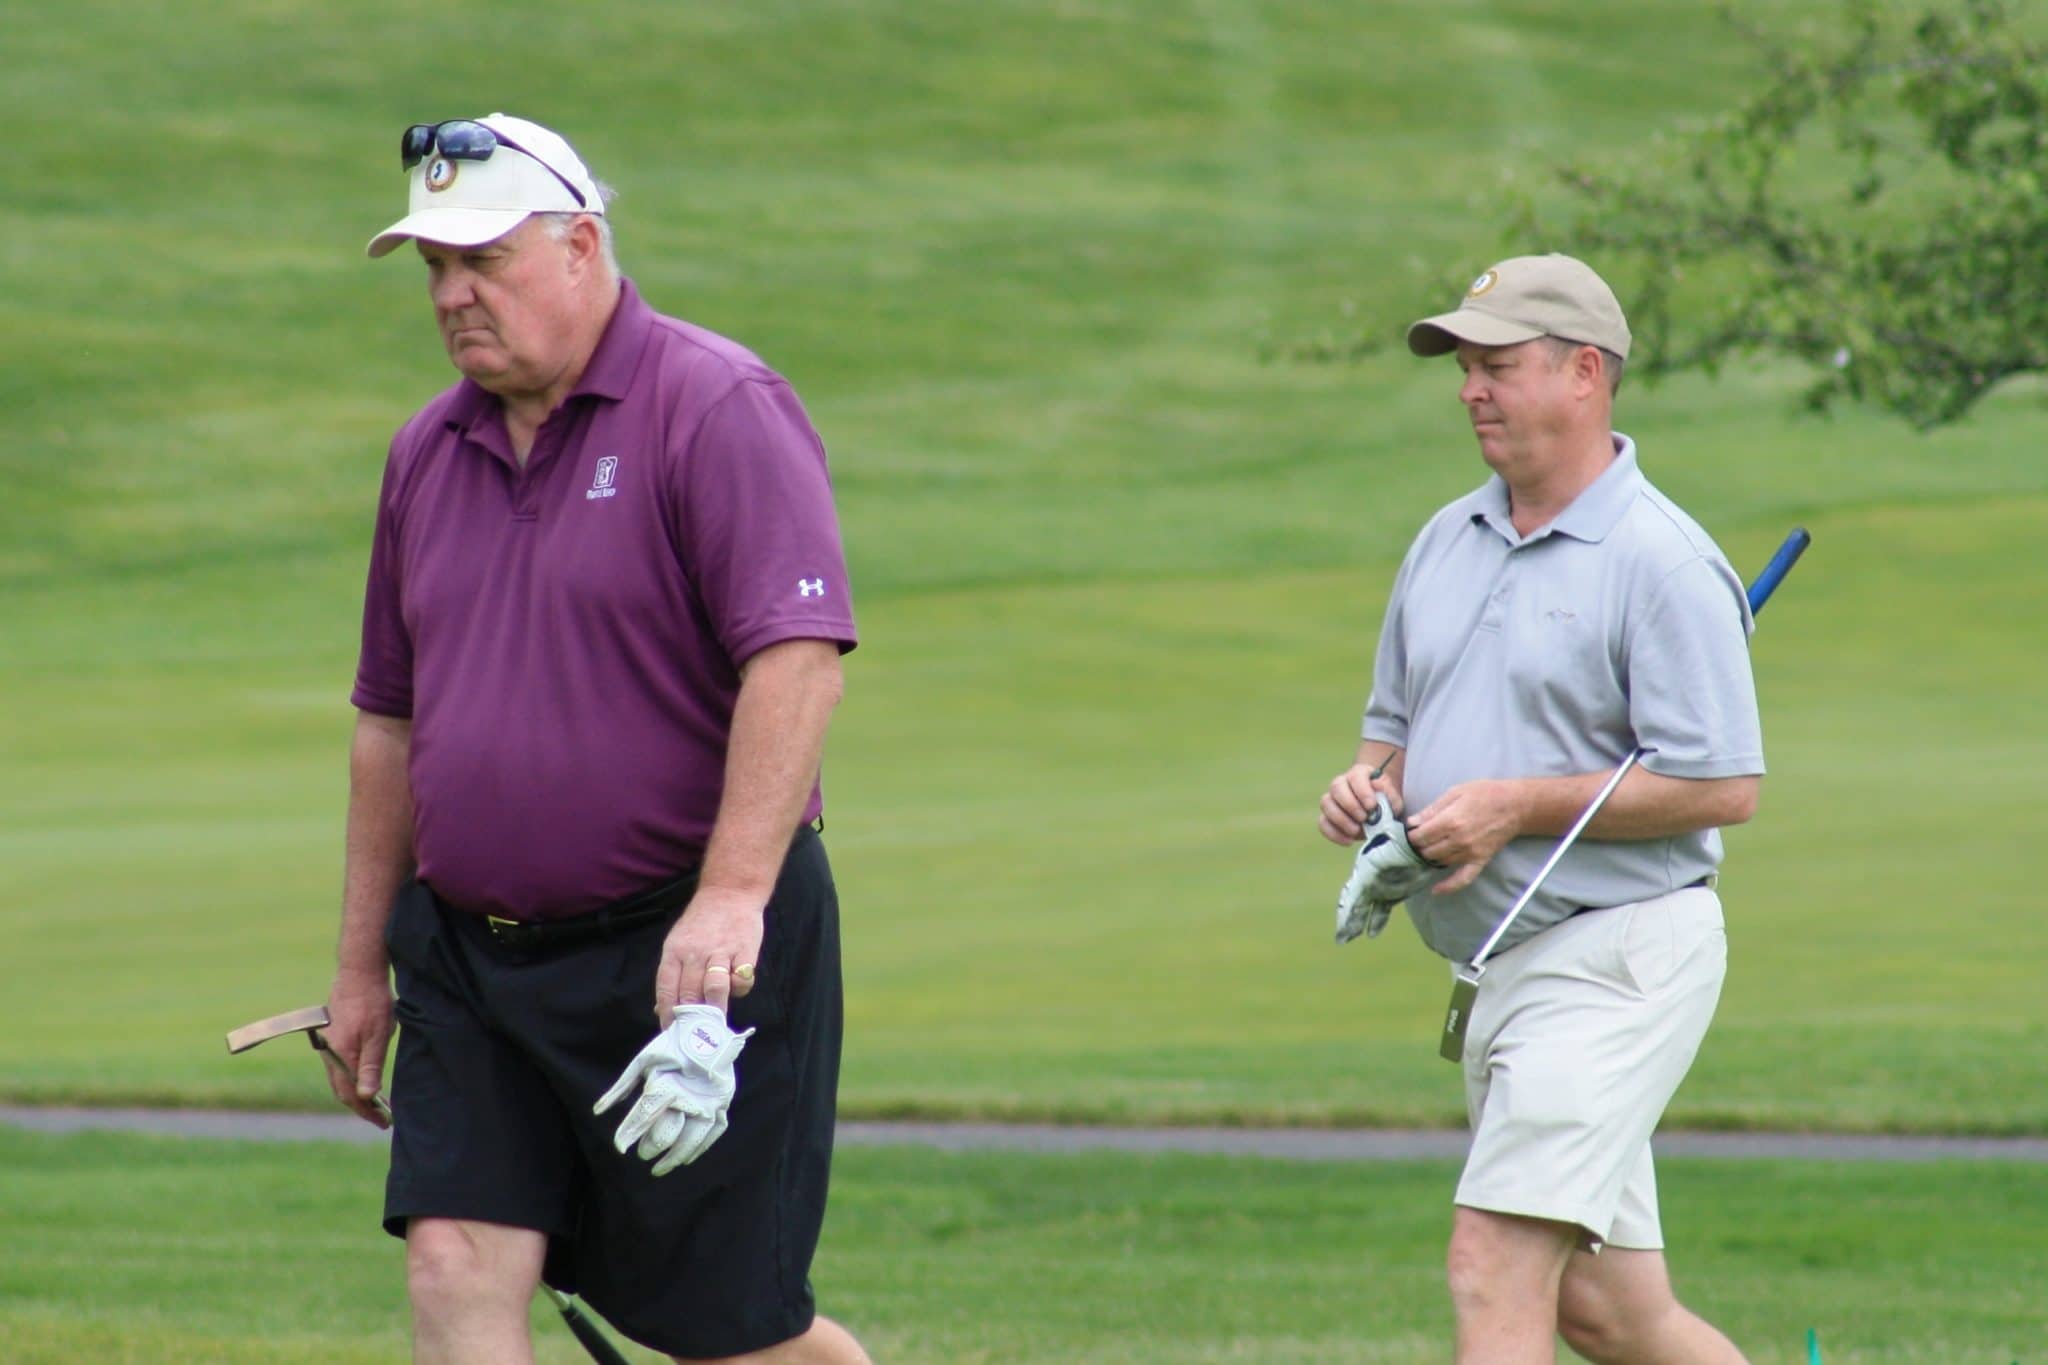 May 23, 2016-Community Options’ Spring Golf Classic at Alpine Country Club, Demarest, NJ